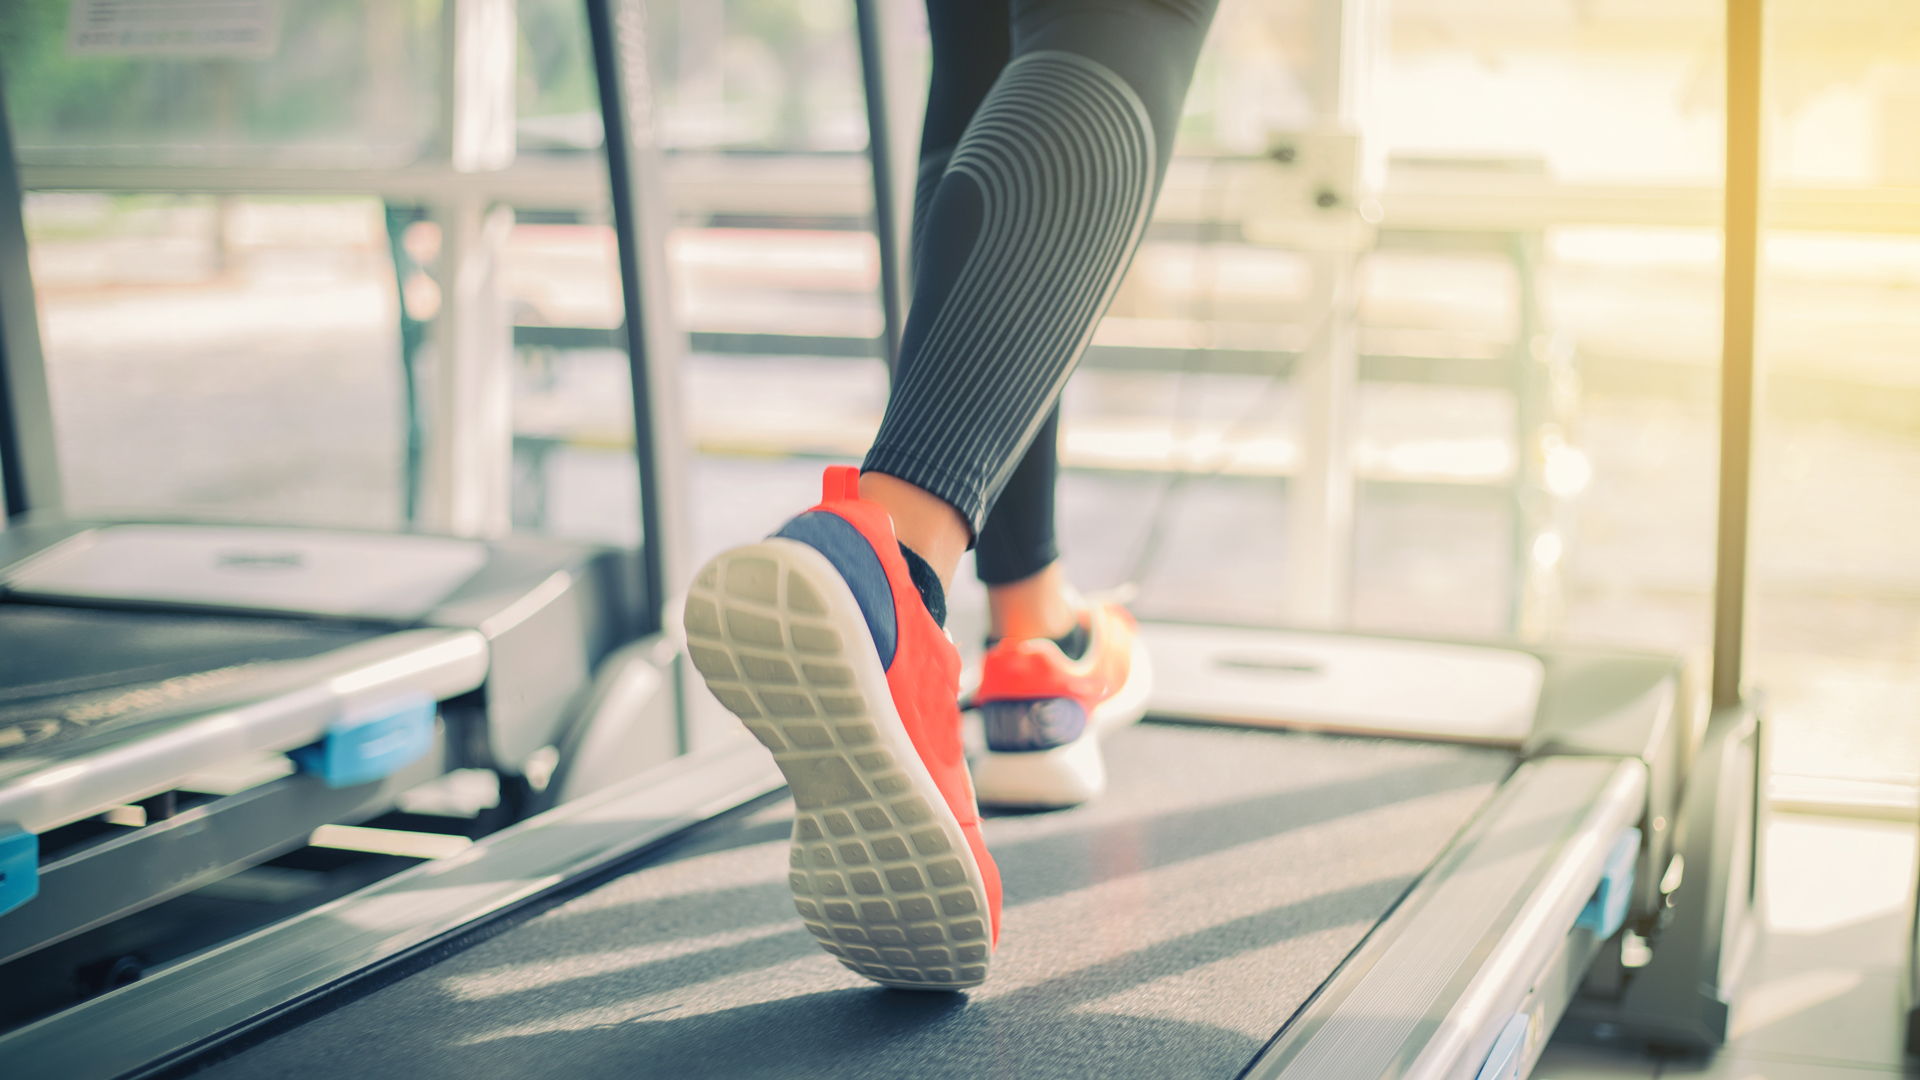 Treadmill deals: which is the right treadmill deal for you?